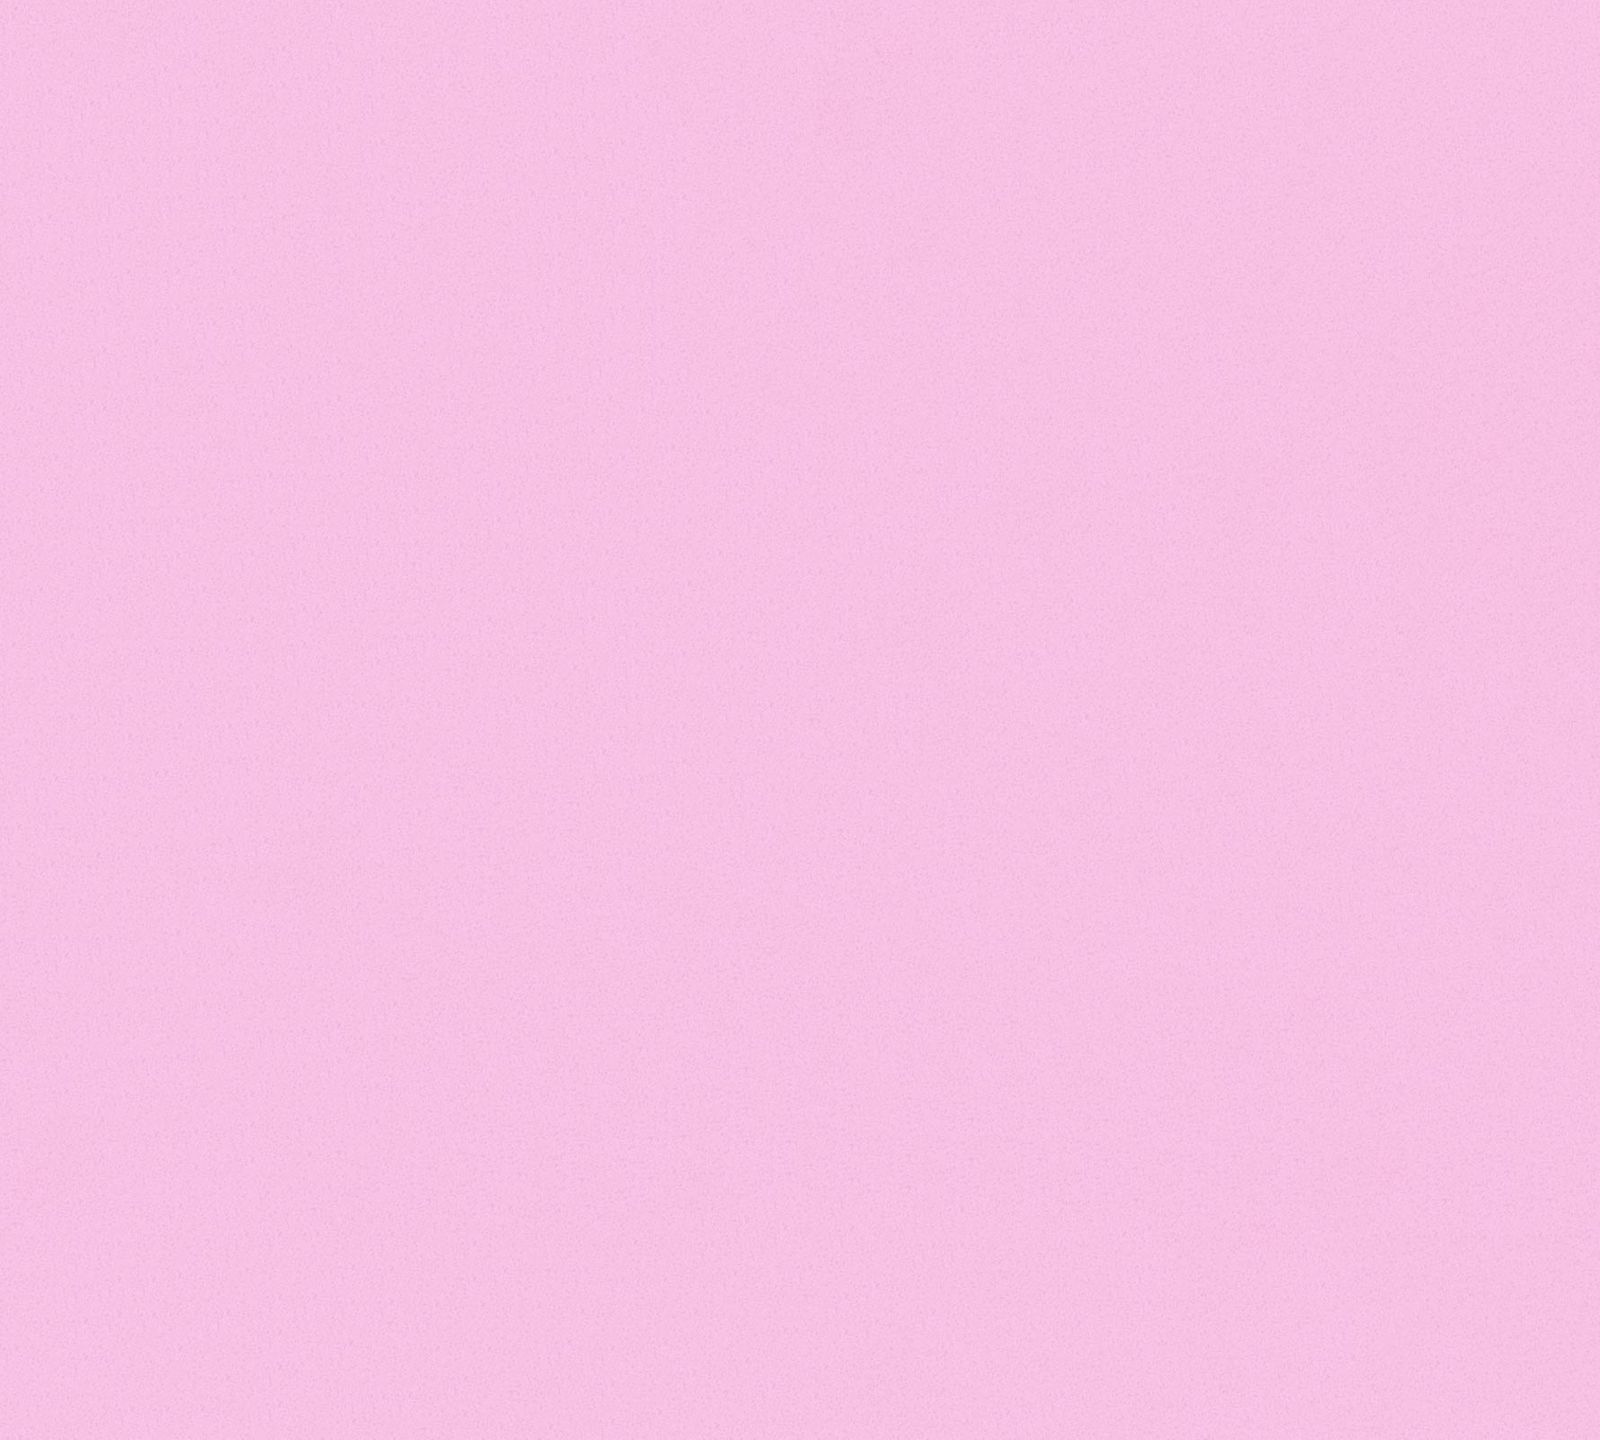 10 Selected solid pink desktop wallpaper You Can Get It For Free ...